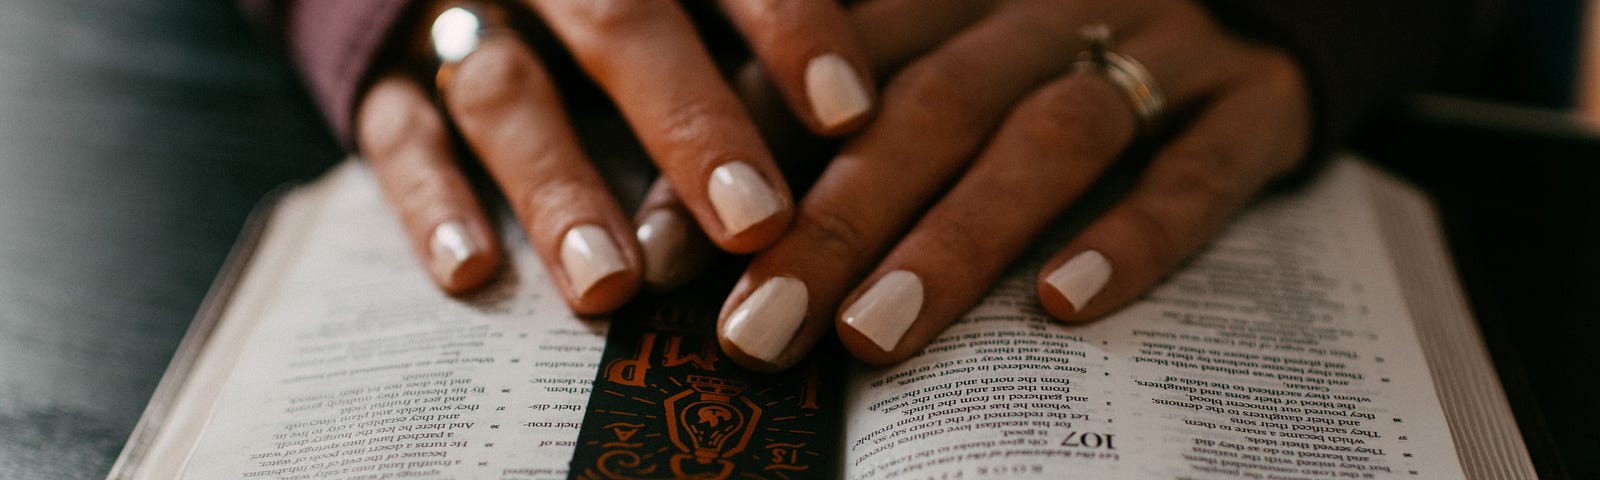 Woman’s hands laying on an open Bible. Prayer.